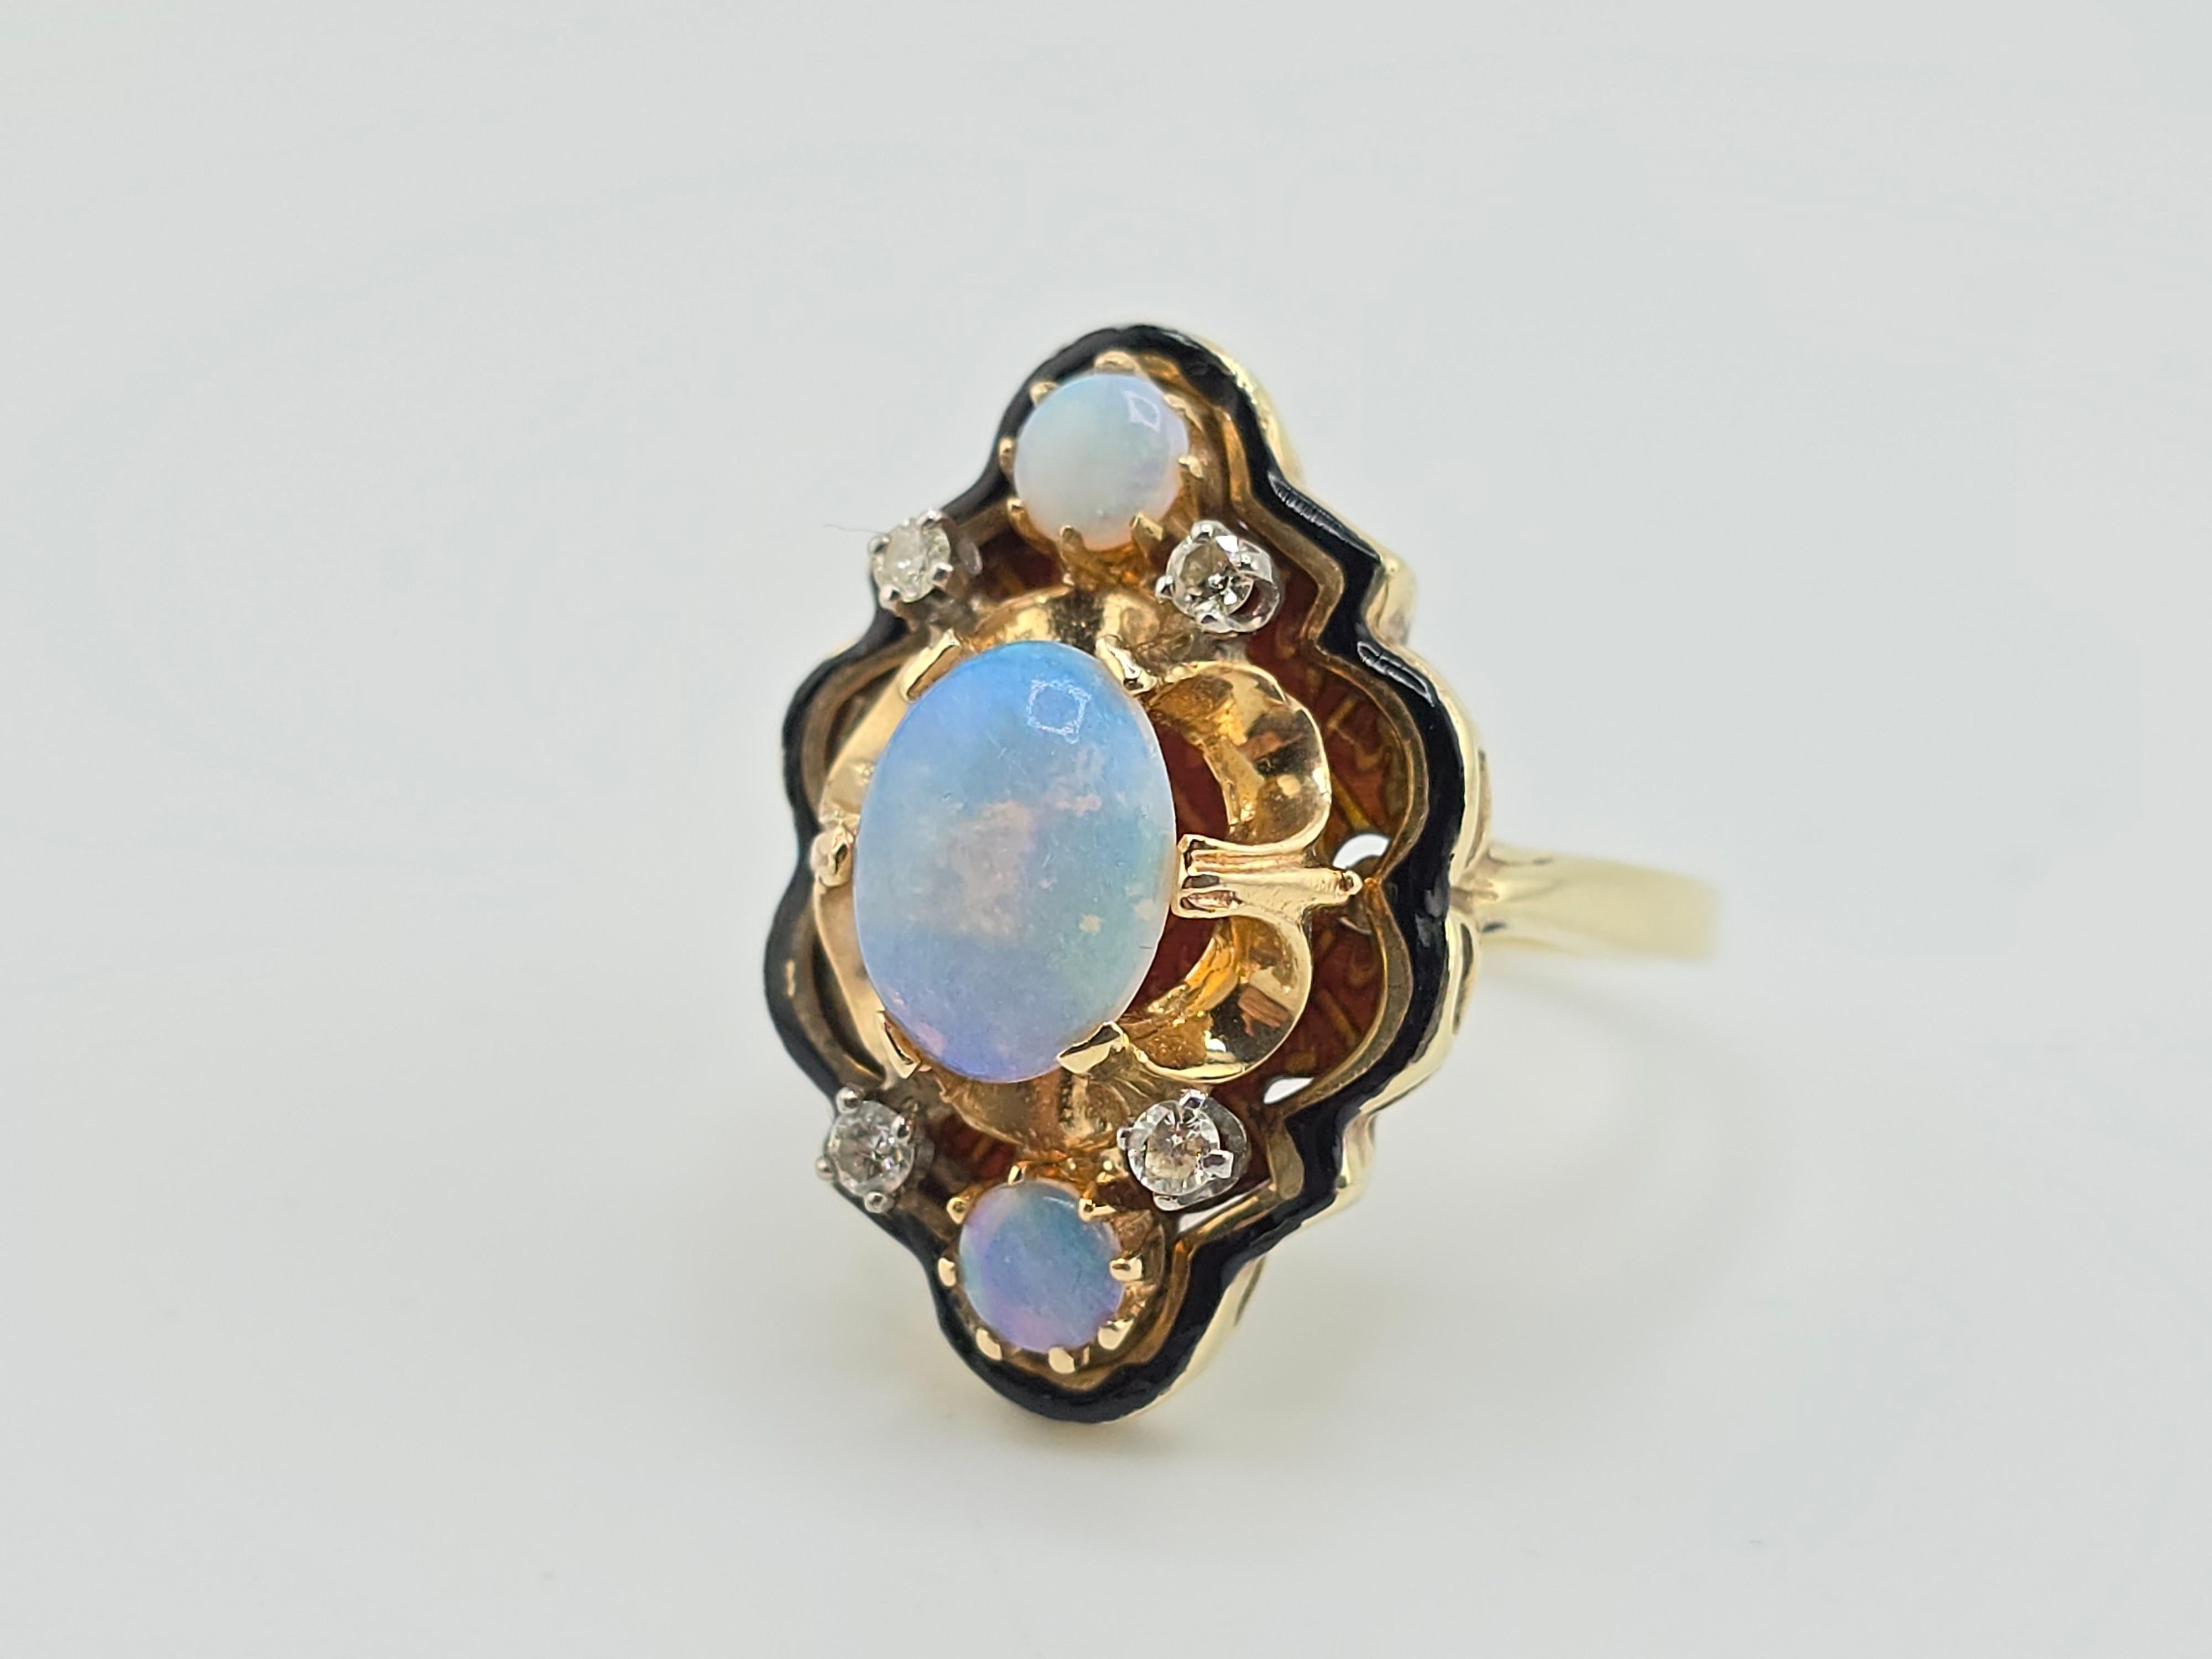 Elevate your jewelry collection with this stunning 14K yellow gold ring featuring natural opals and diamonds. The intricate design is inspired by nature, with a focus on the captivating opal stones that reflect a rainbow of colors. The ring is